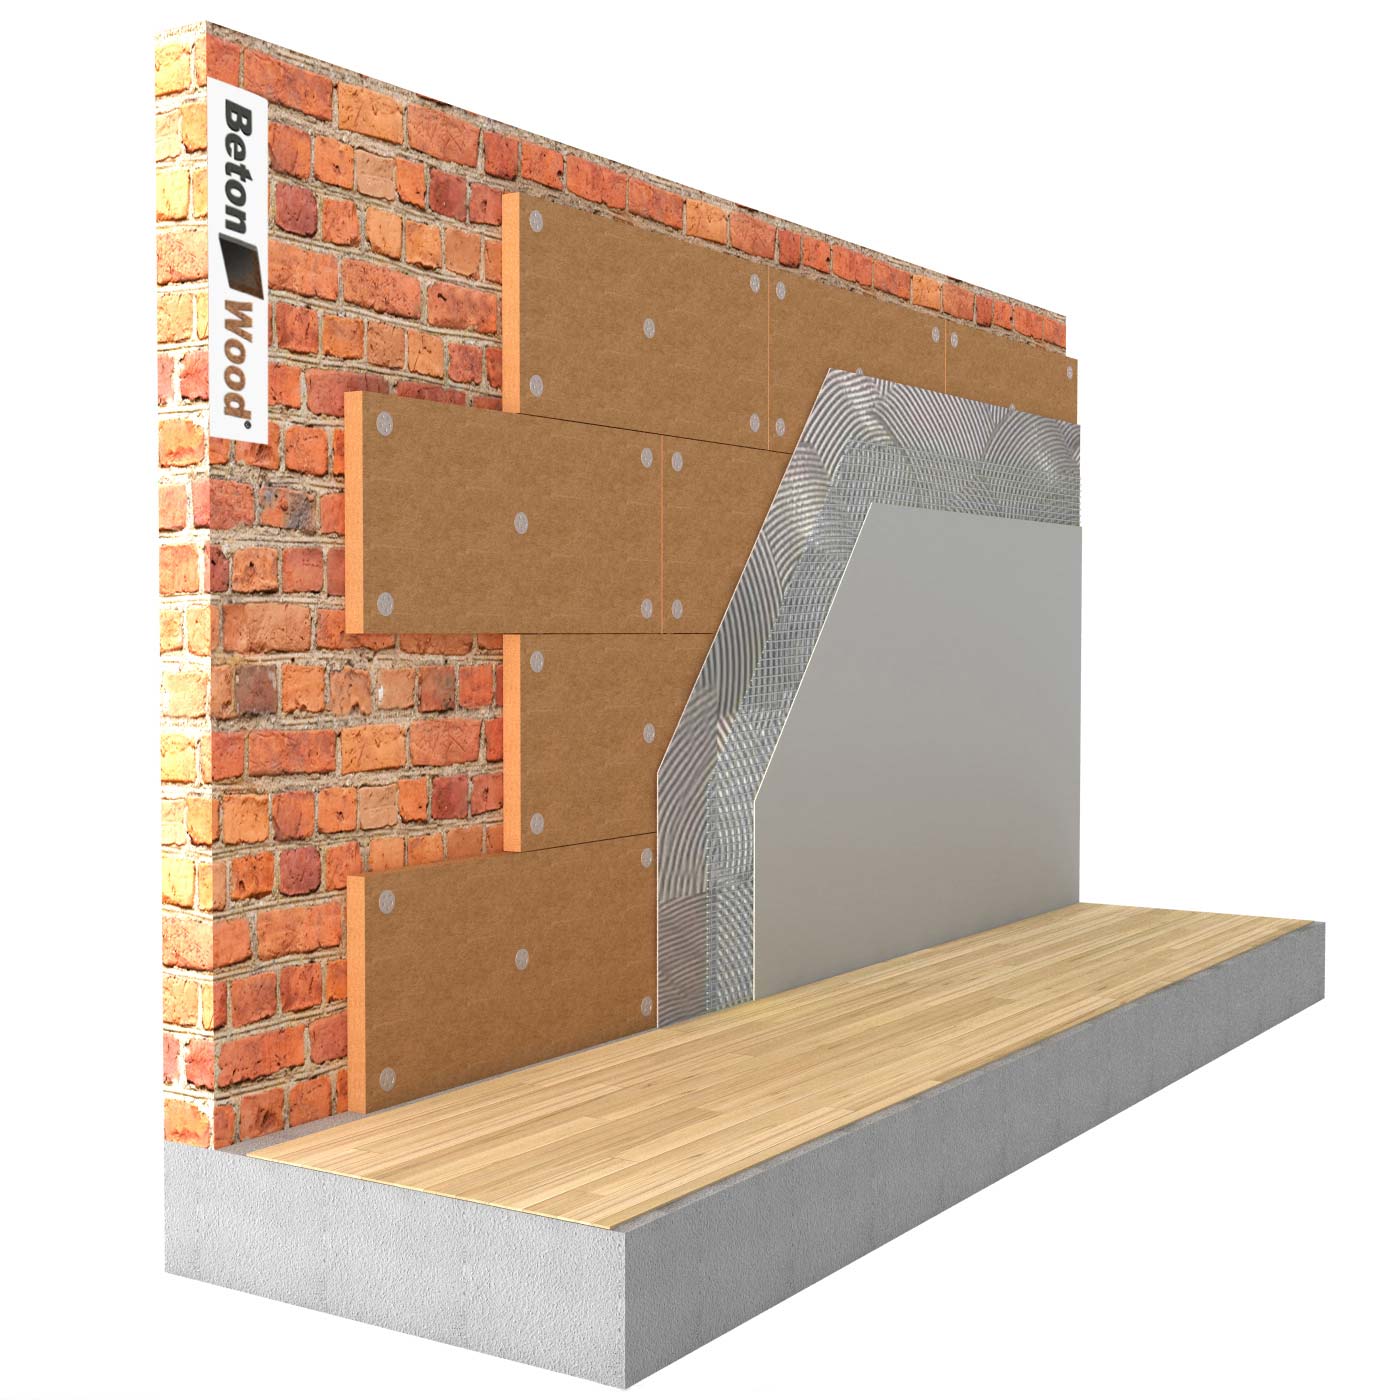 Internal thermal insulation system in Wood fiber